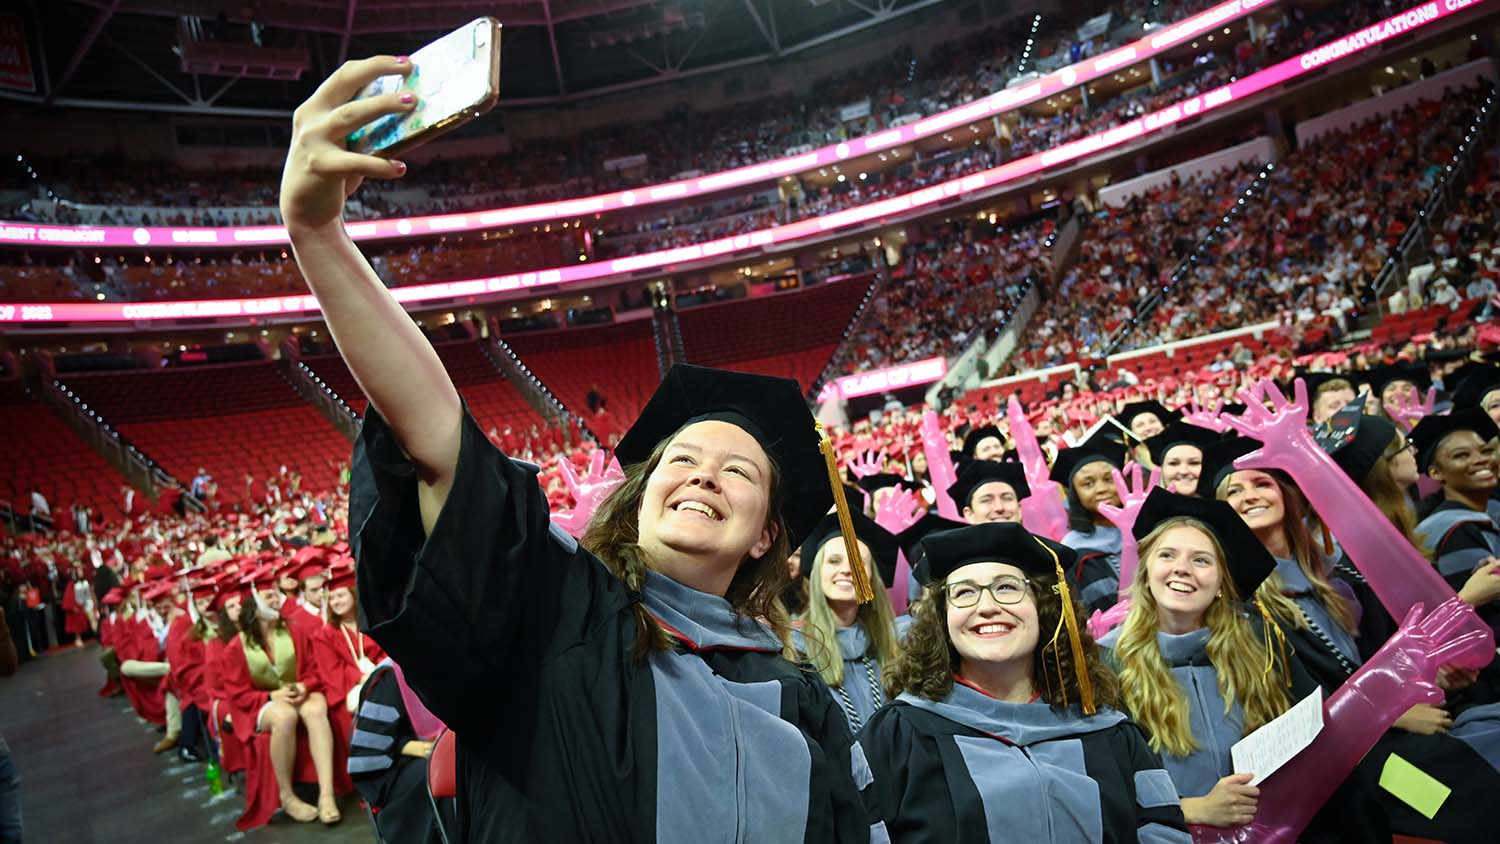 Graduate students celebrate their achievements during commencement